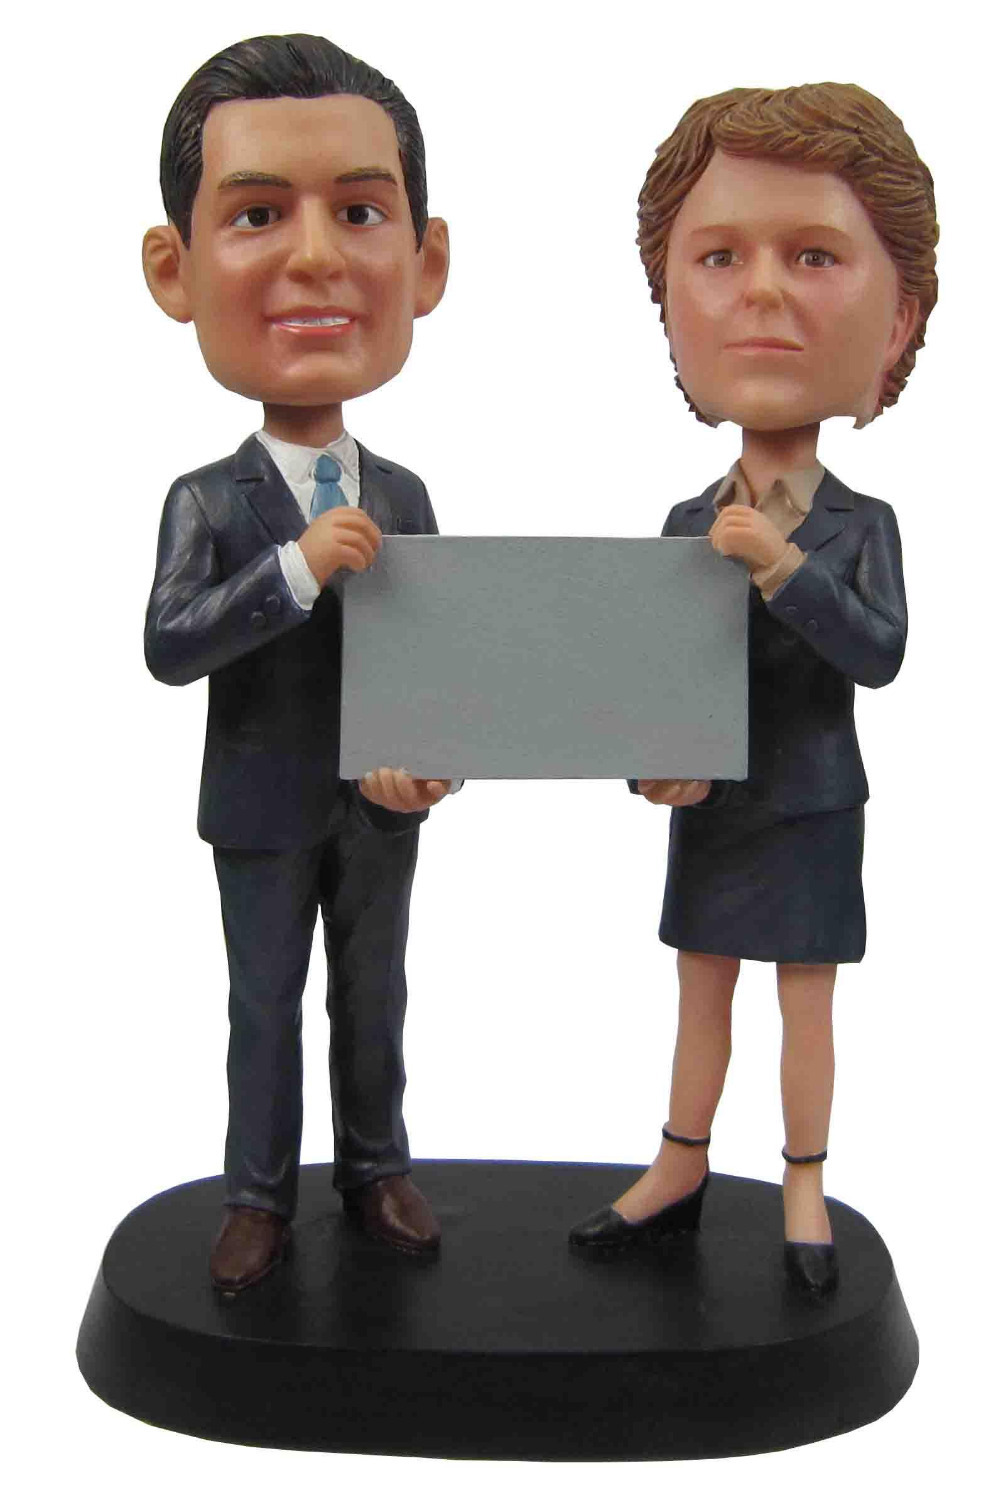 Personalize business cooperation custom bobble head